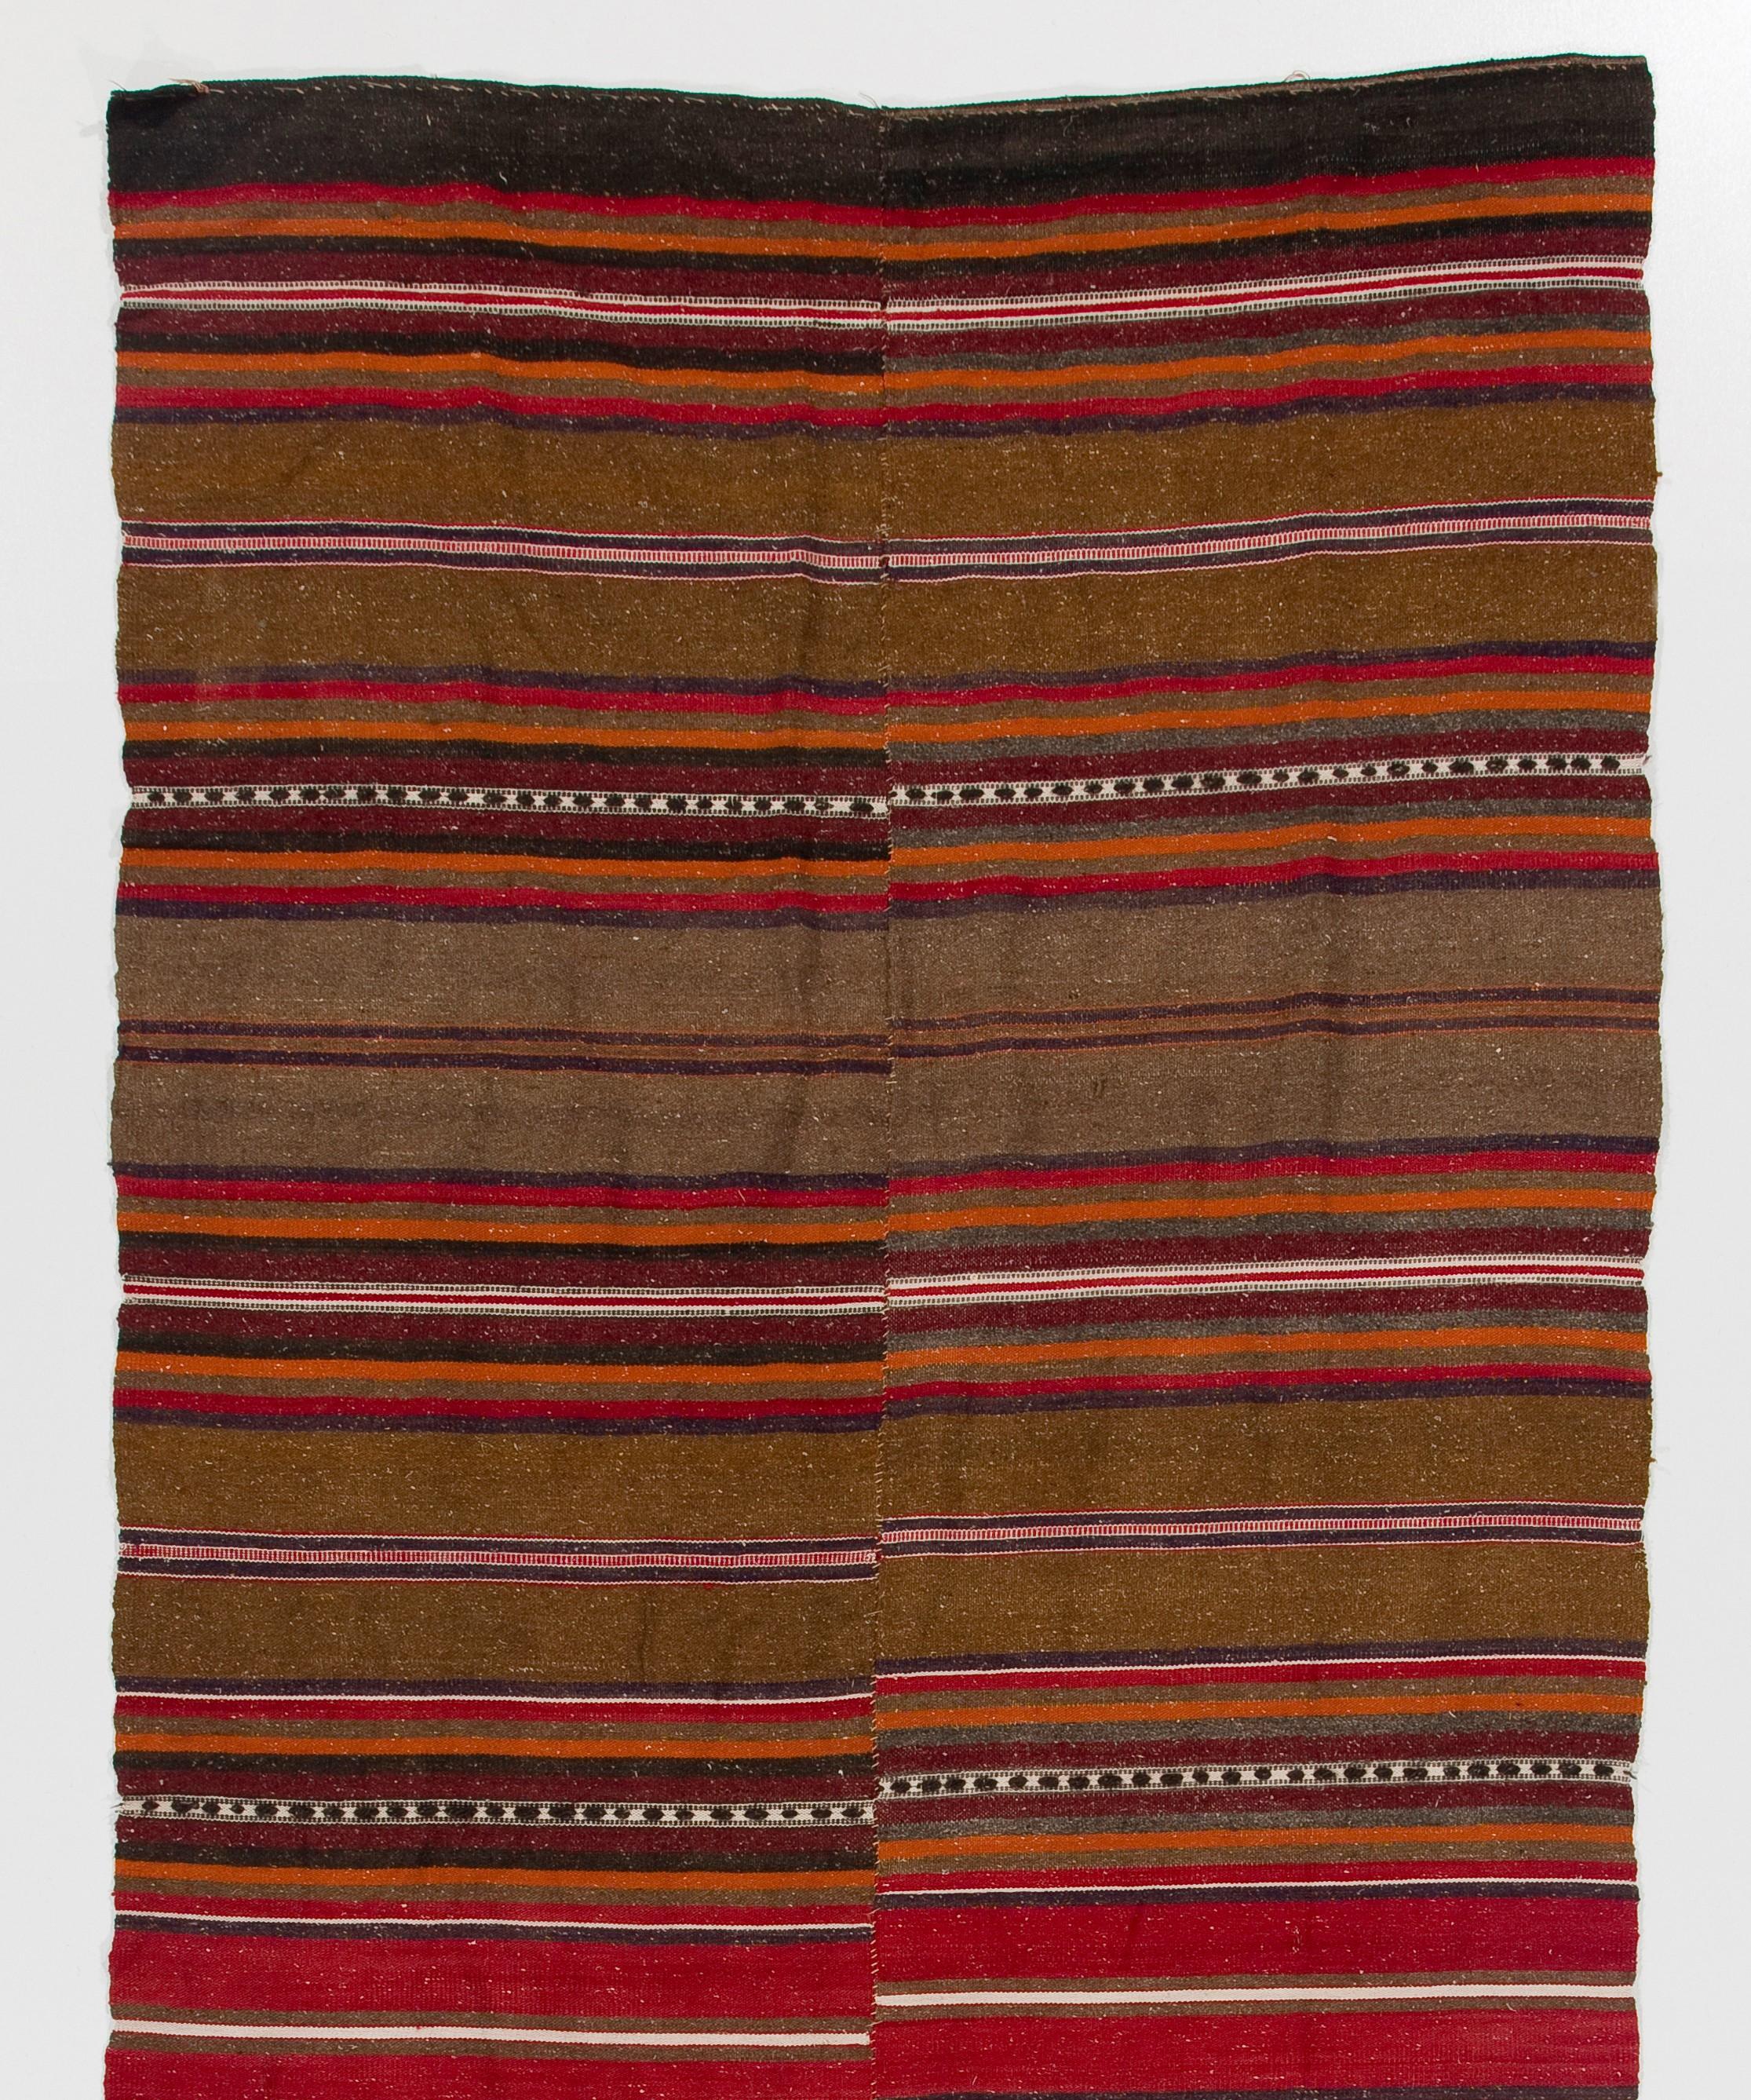 This beautiful and simple flat-woven runner is made of natural wool in shades of red, ivory, brown, orange and gray.

We can modify the dimensions if requested, ie. make it shorter and/or narrower.

Reversible; both sides can be used.

Ideal for